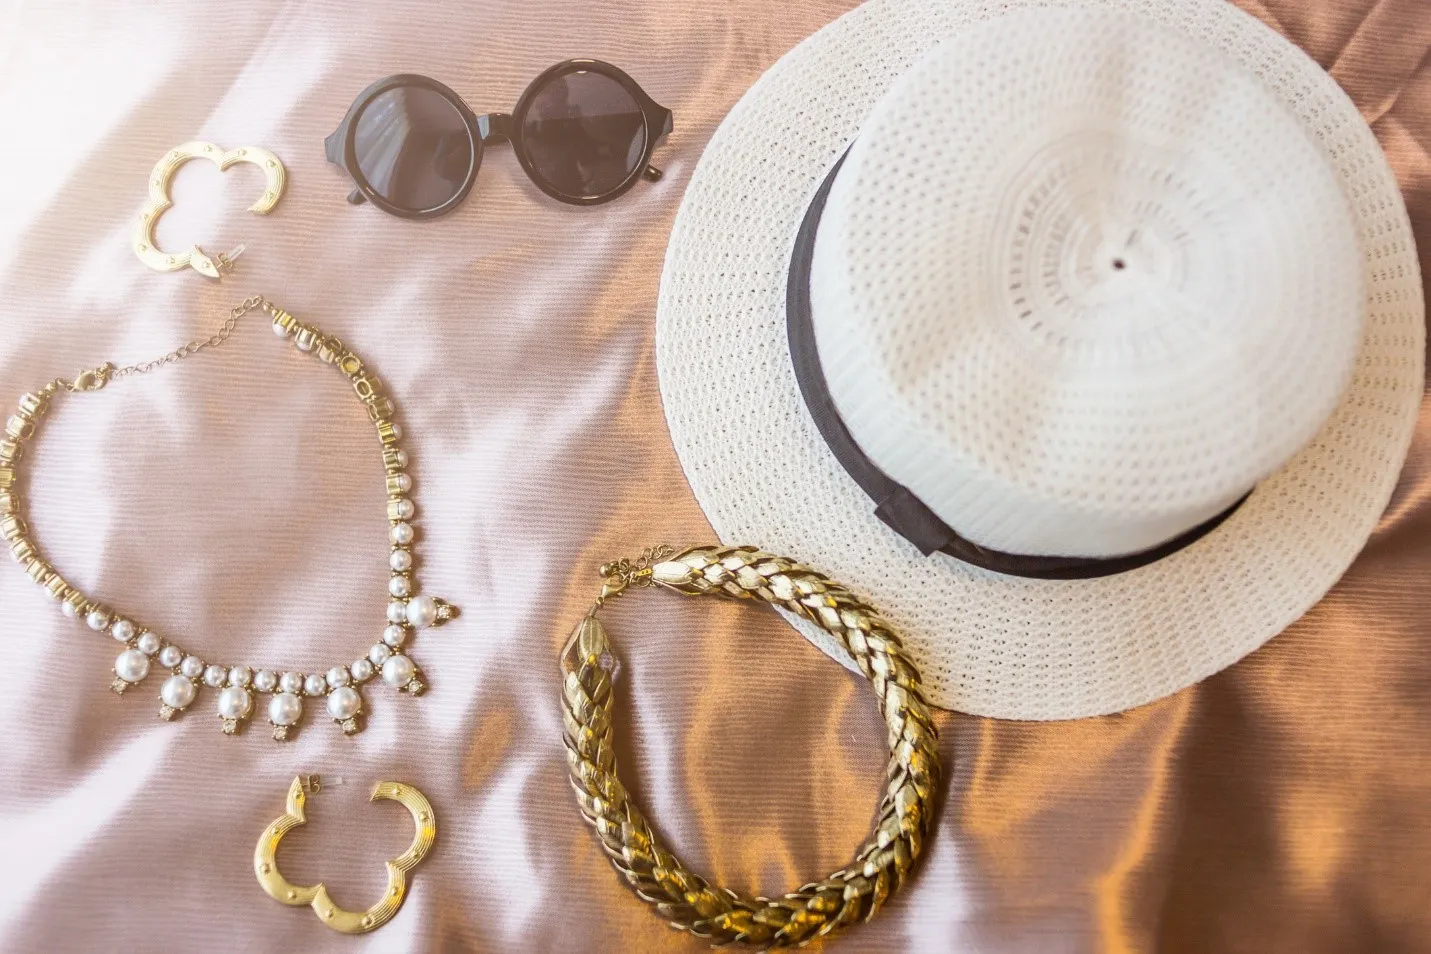 How to Pack Jewelry for a Vacation